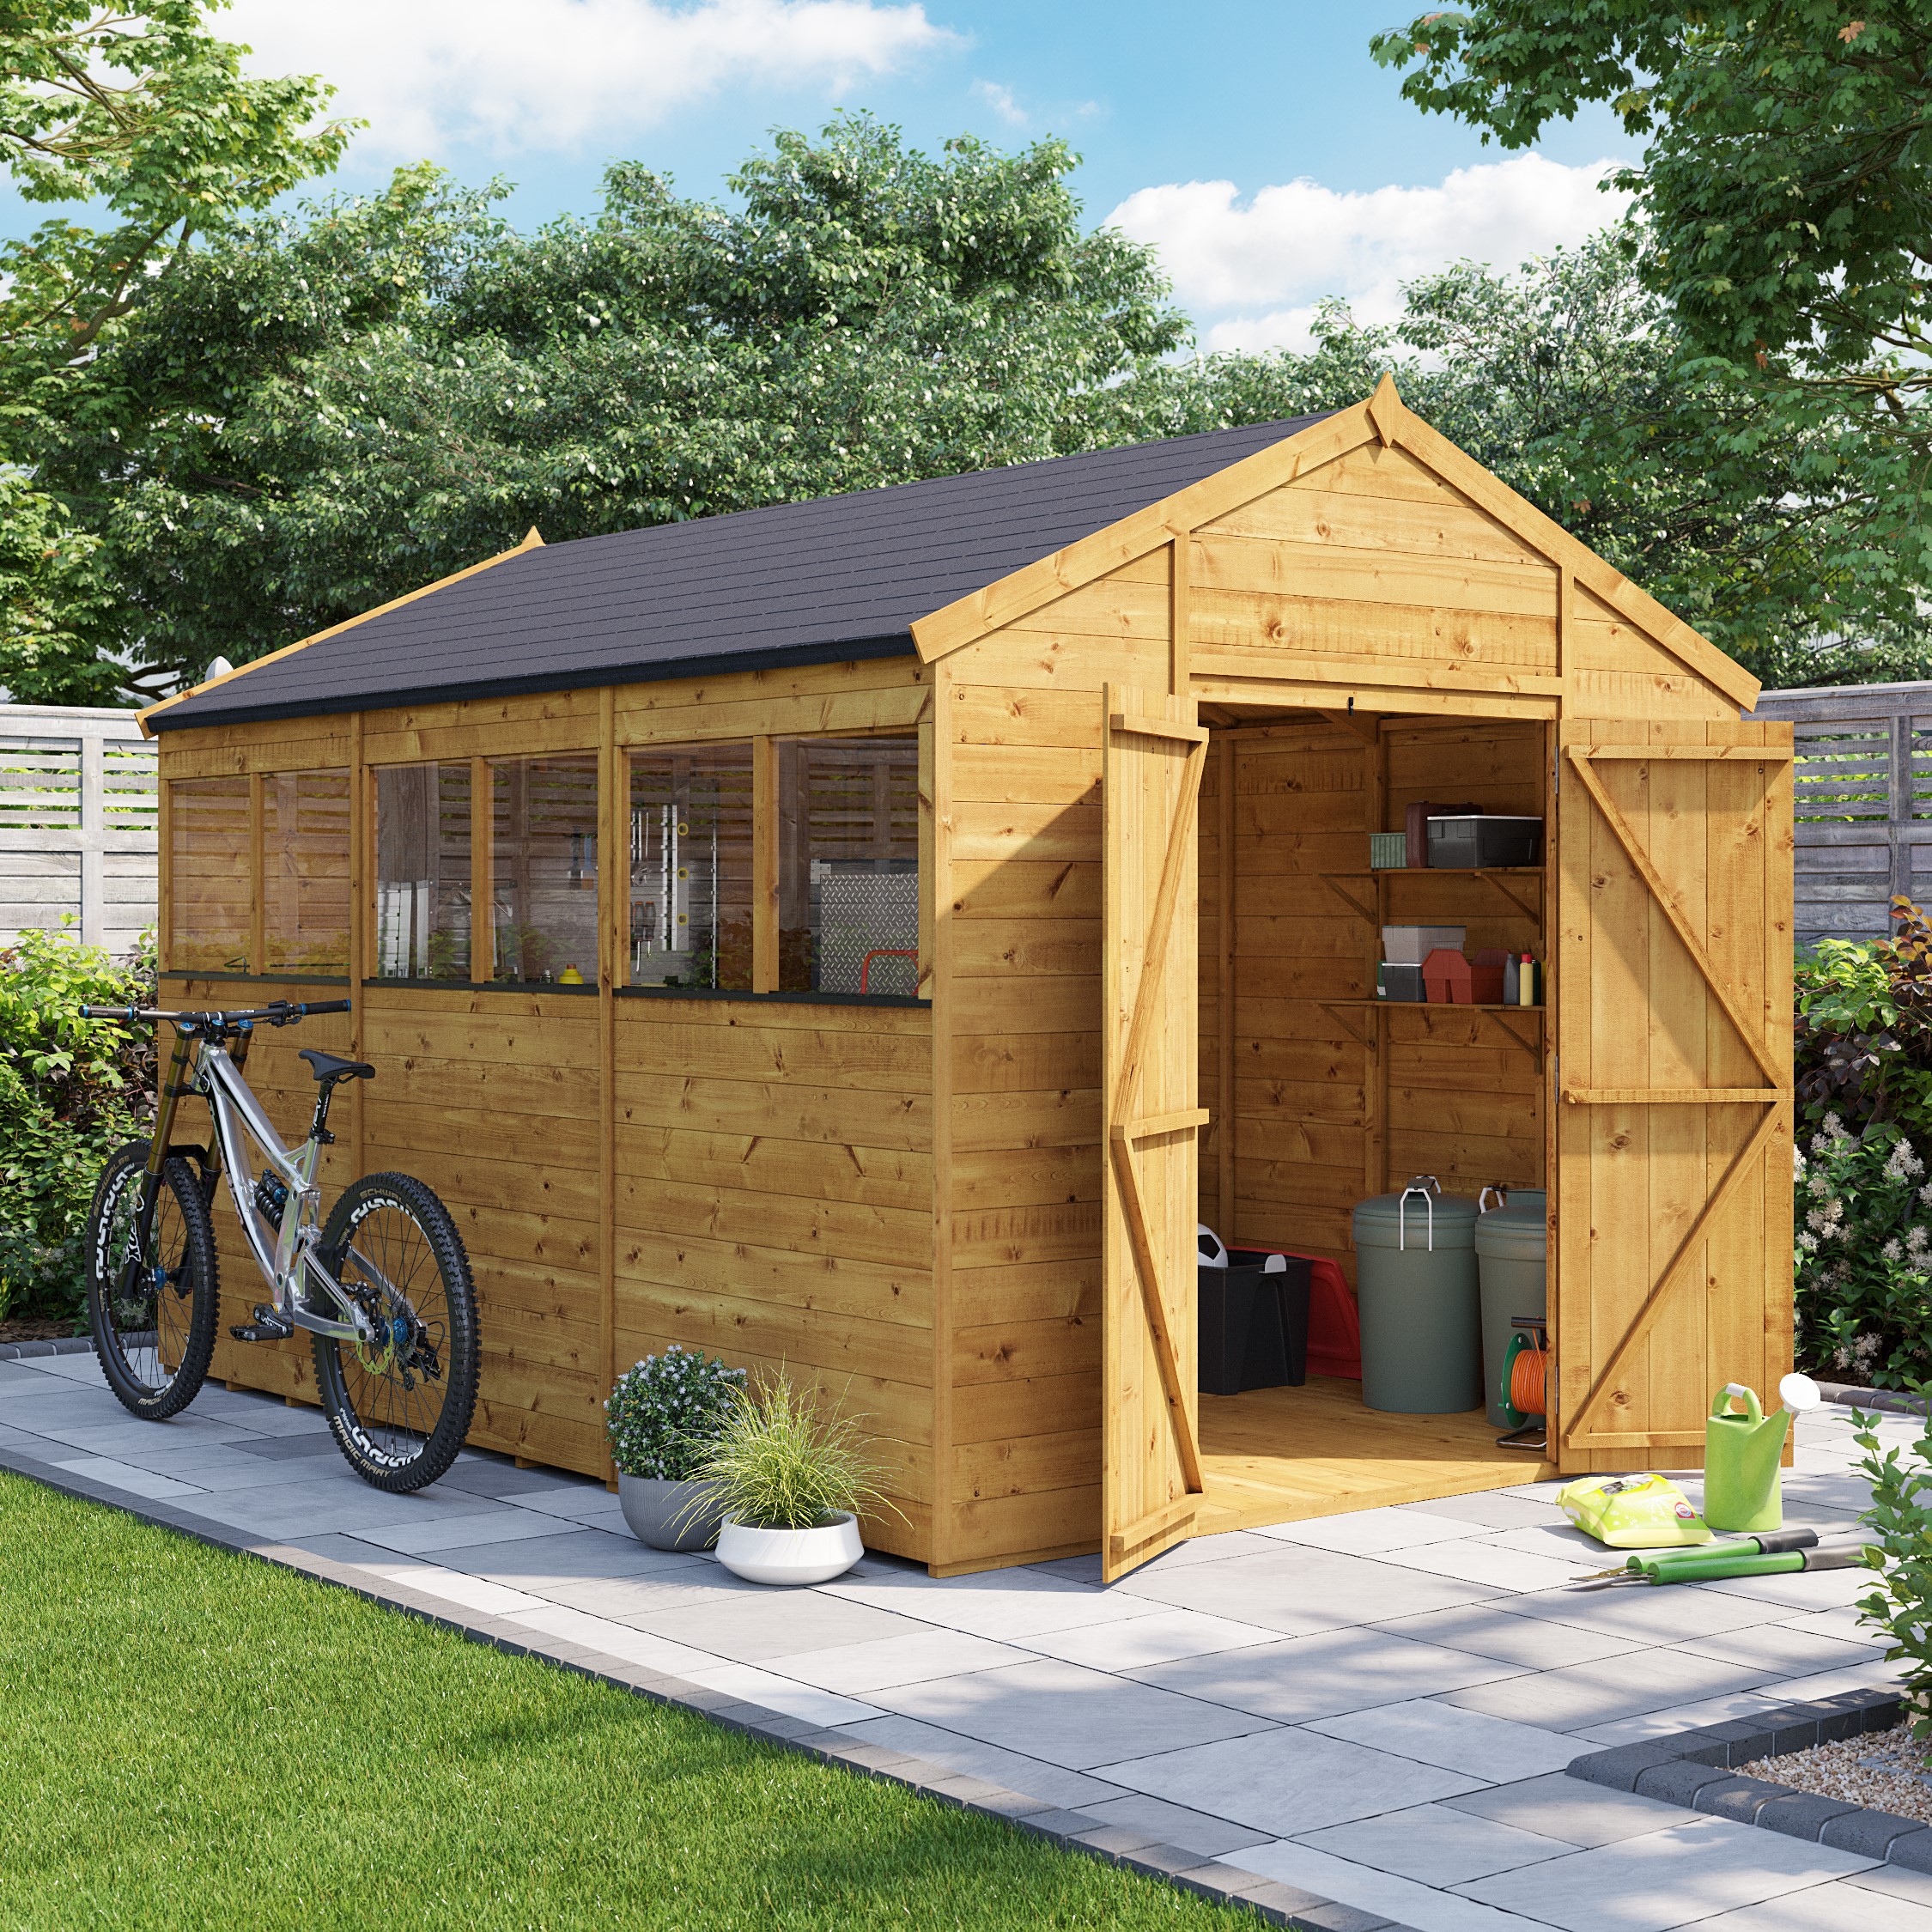 12x8 Expert T&G Apex Workshop Shed - Windowless BillyOh - Pressure Treated Wooden Shed - 12 x 8ft